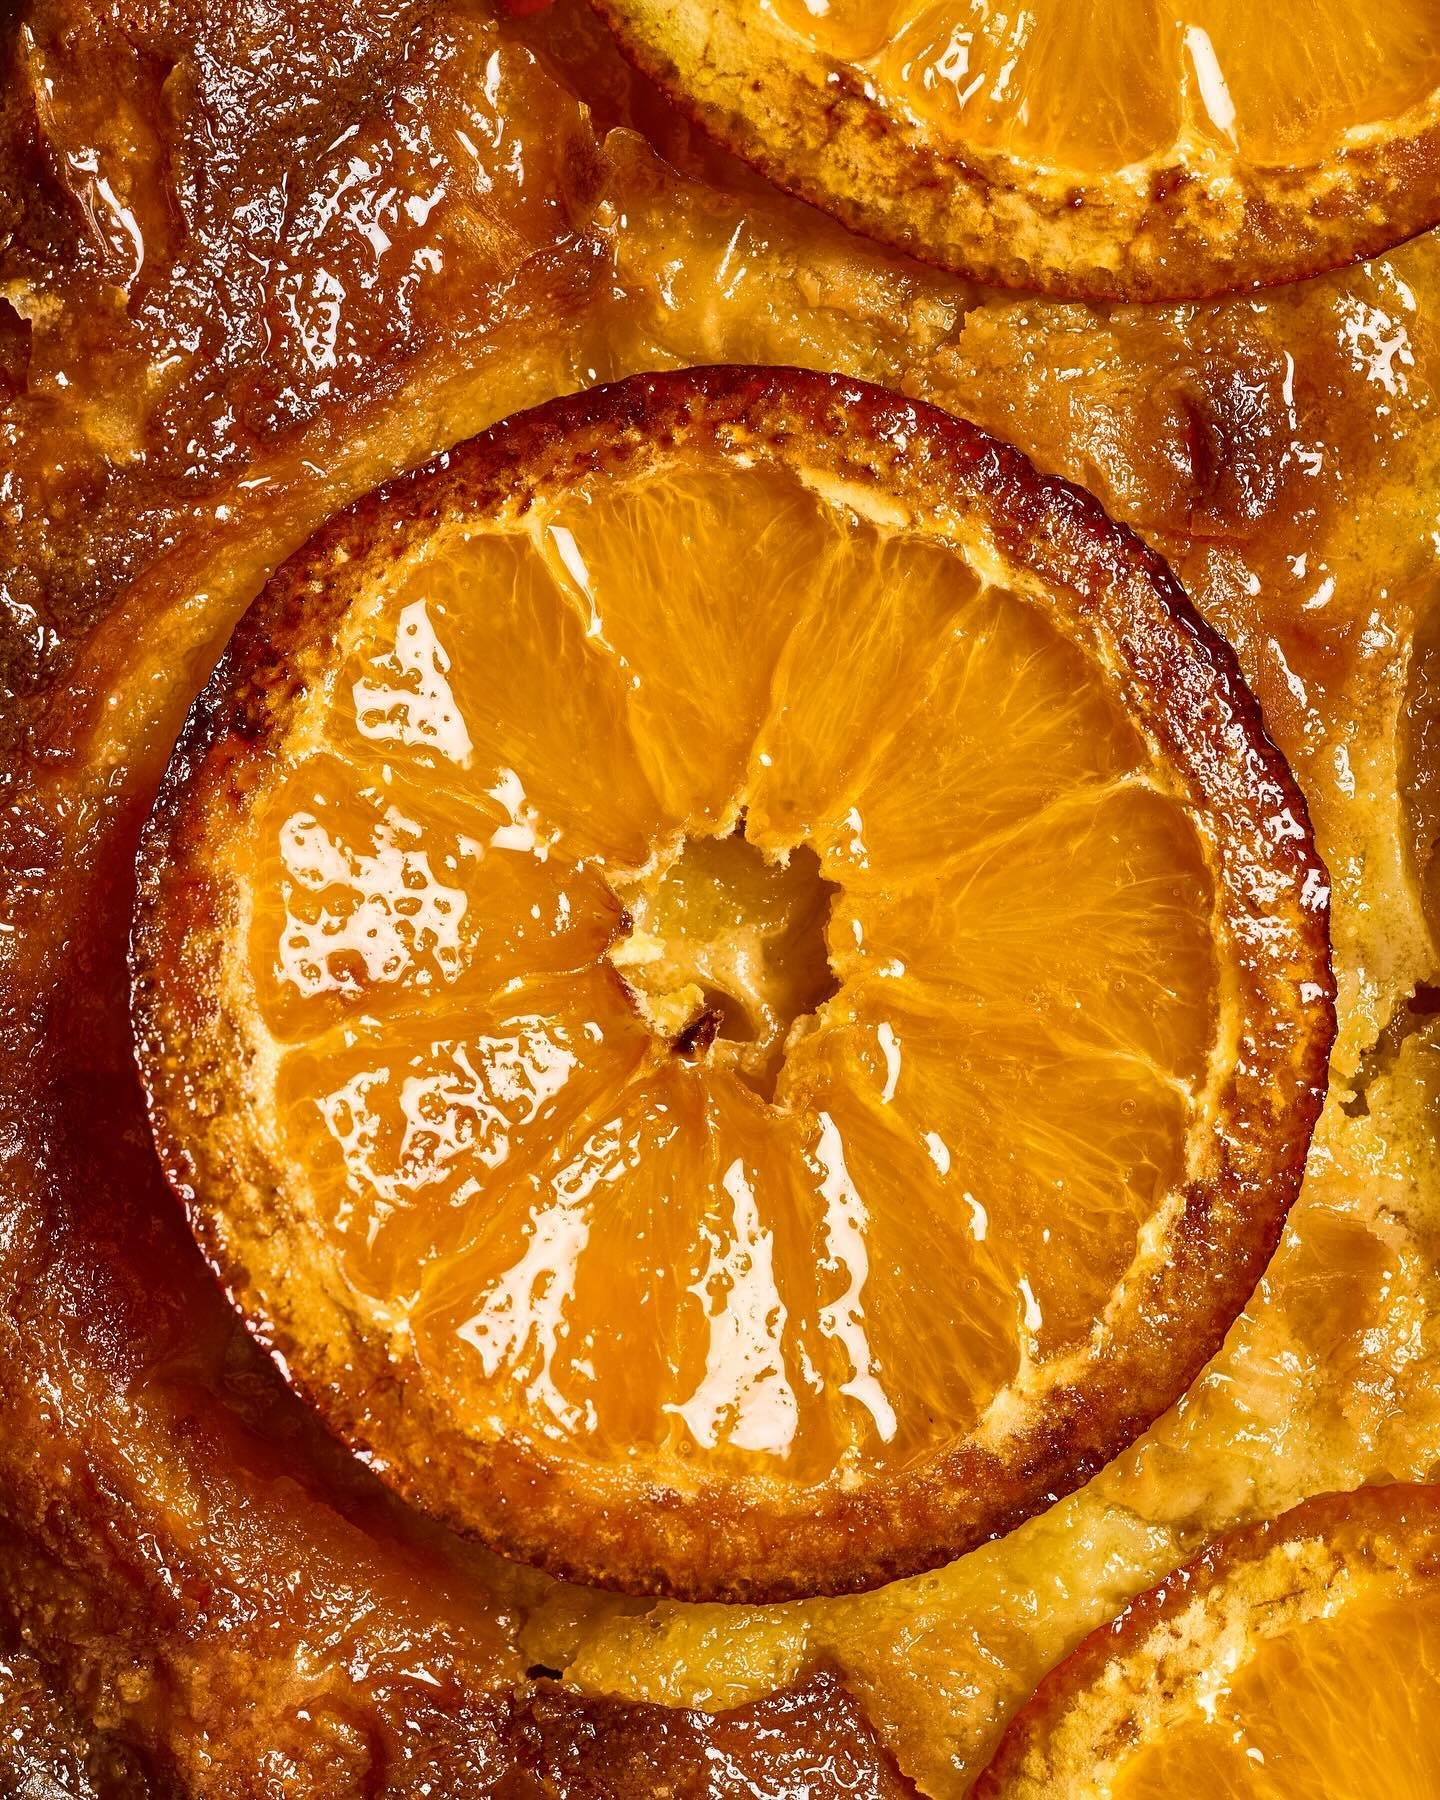 close ups for @gastronomos_ with @yannissikianakis 🍊🫠

_____
#orangepie #syruptexture #closeup #editorial #gastronomos #patisserie #patisseriegreece #foodstyling #foodstylinggreece #foodstylingathens